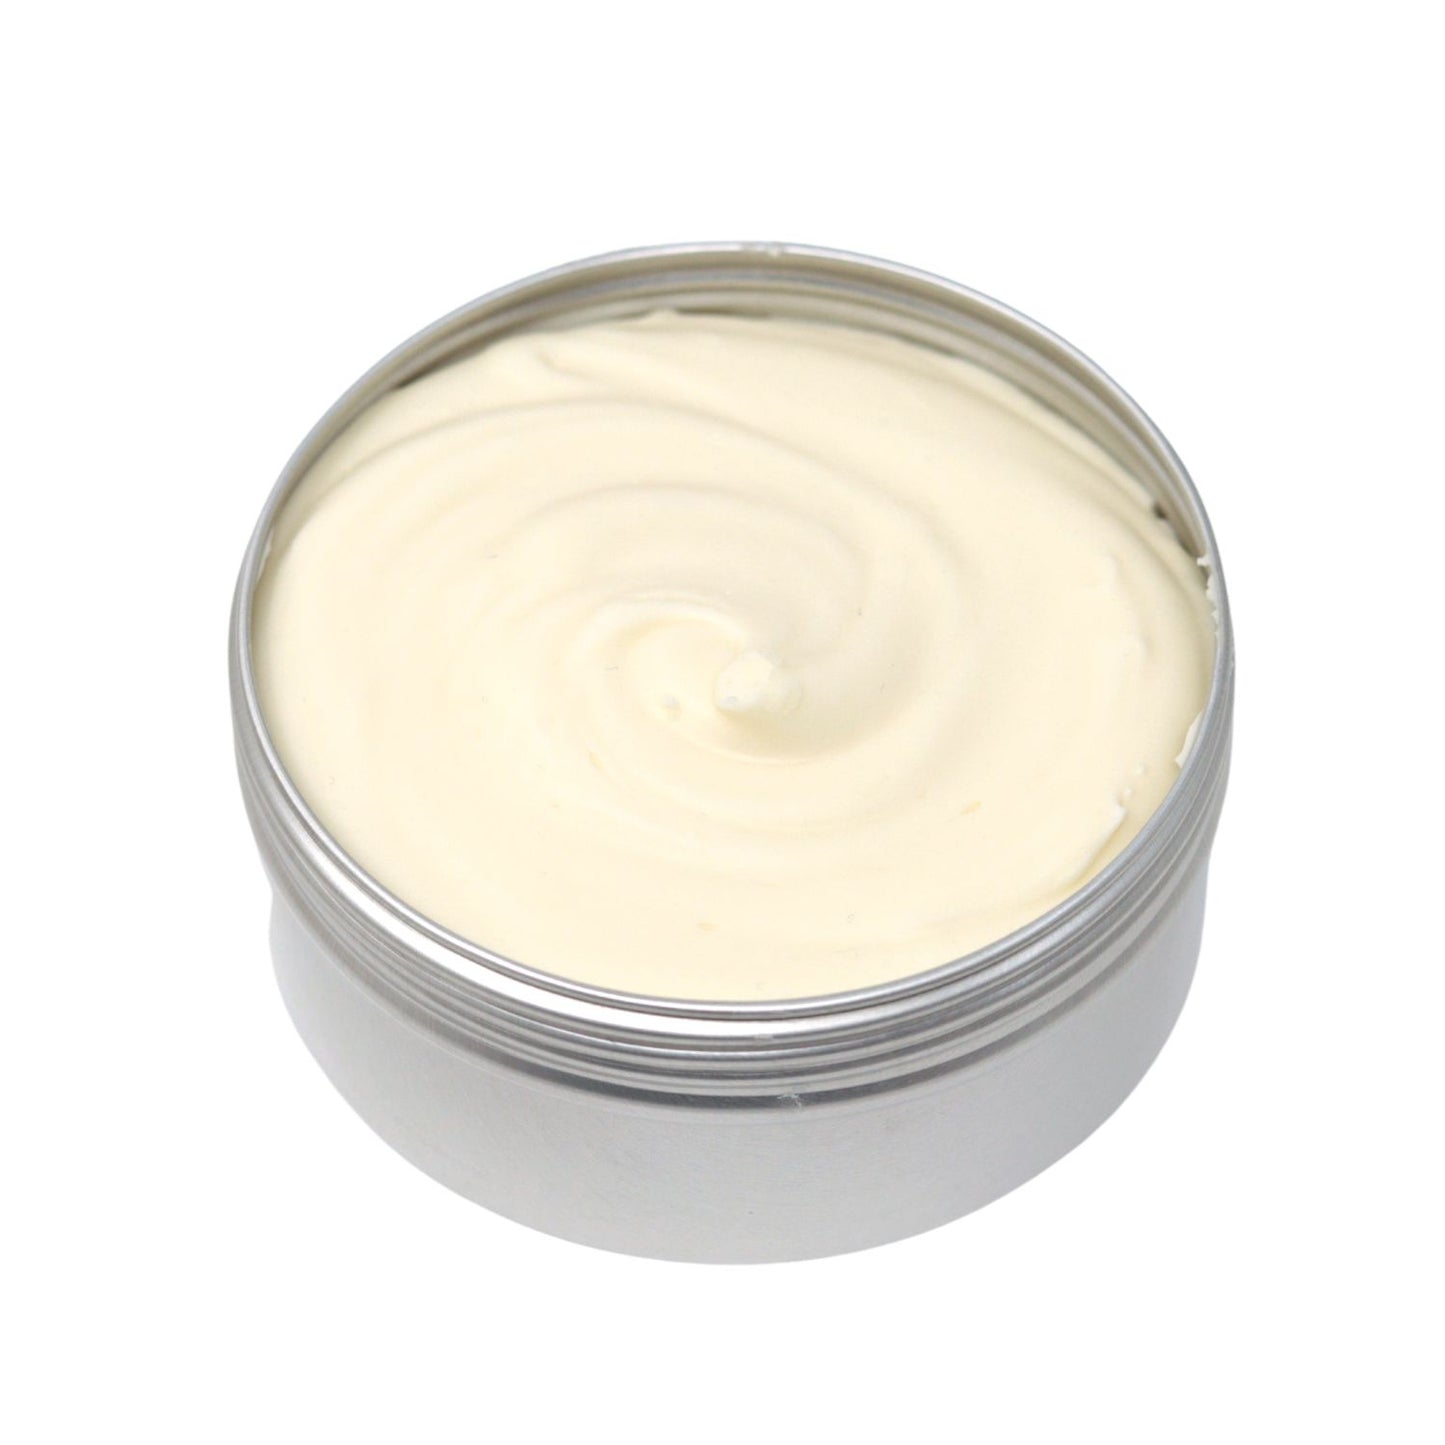 Unscented Organic Infused Whipped Shea Butter - 150g